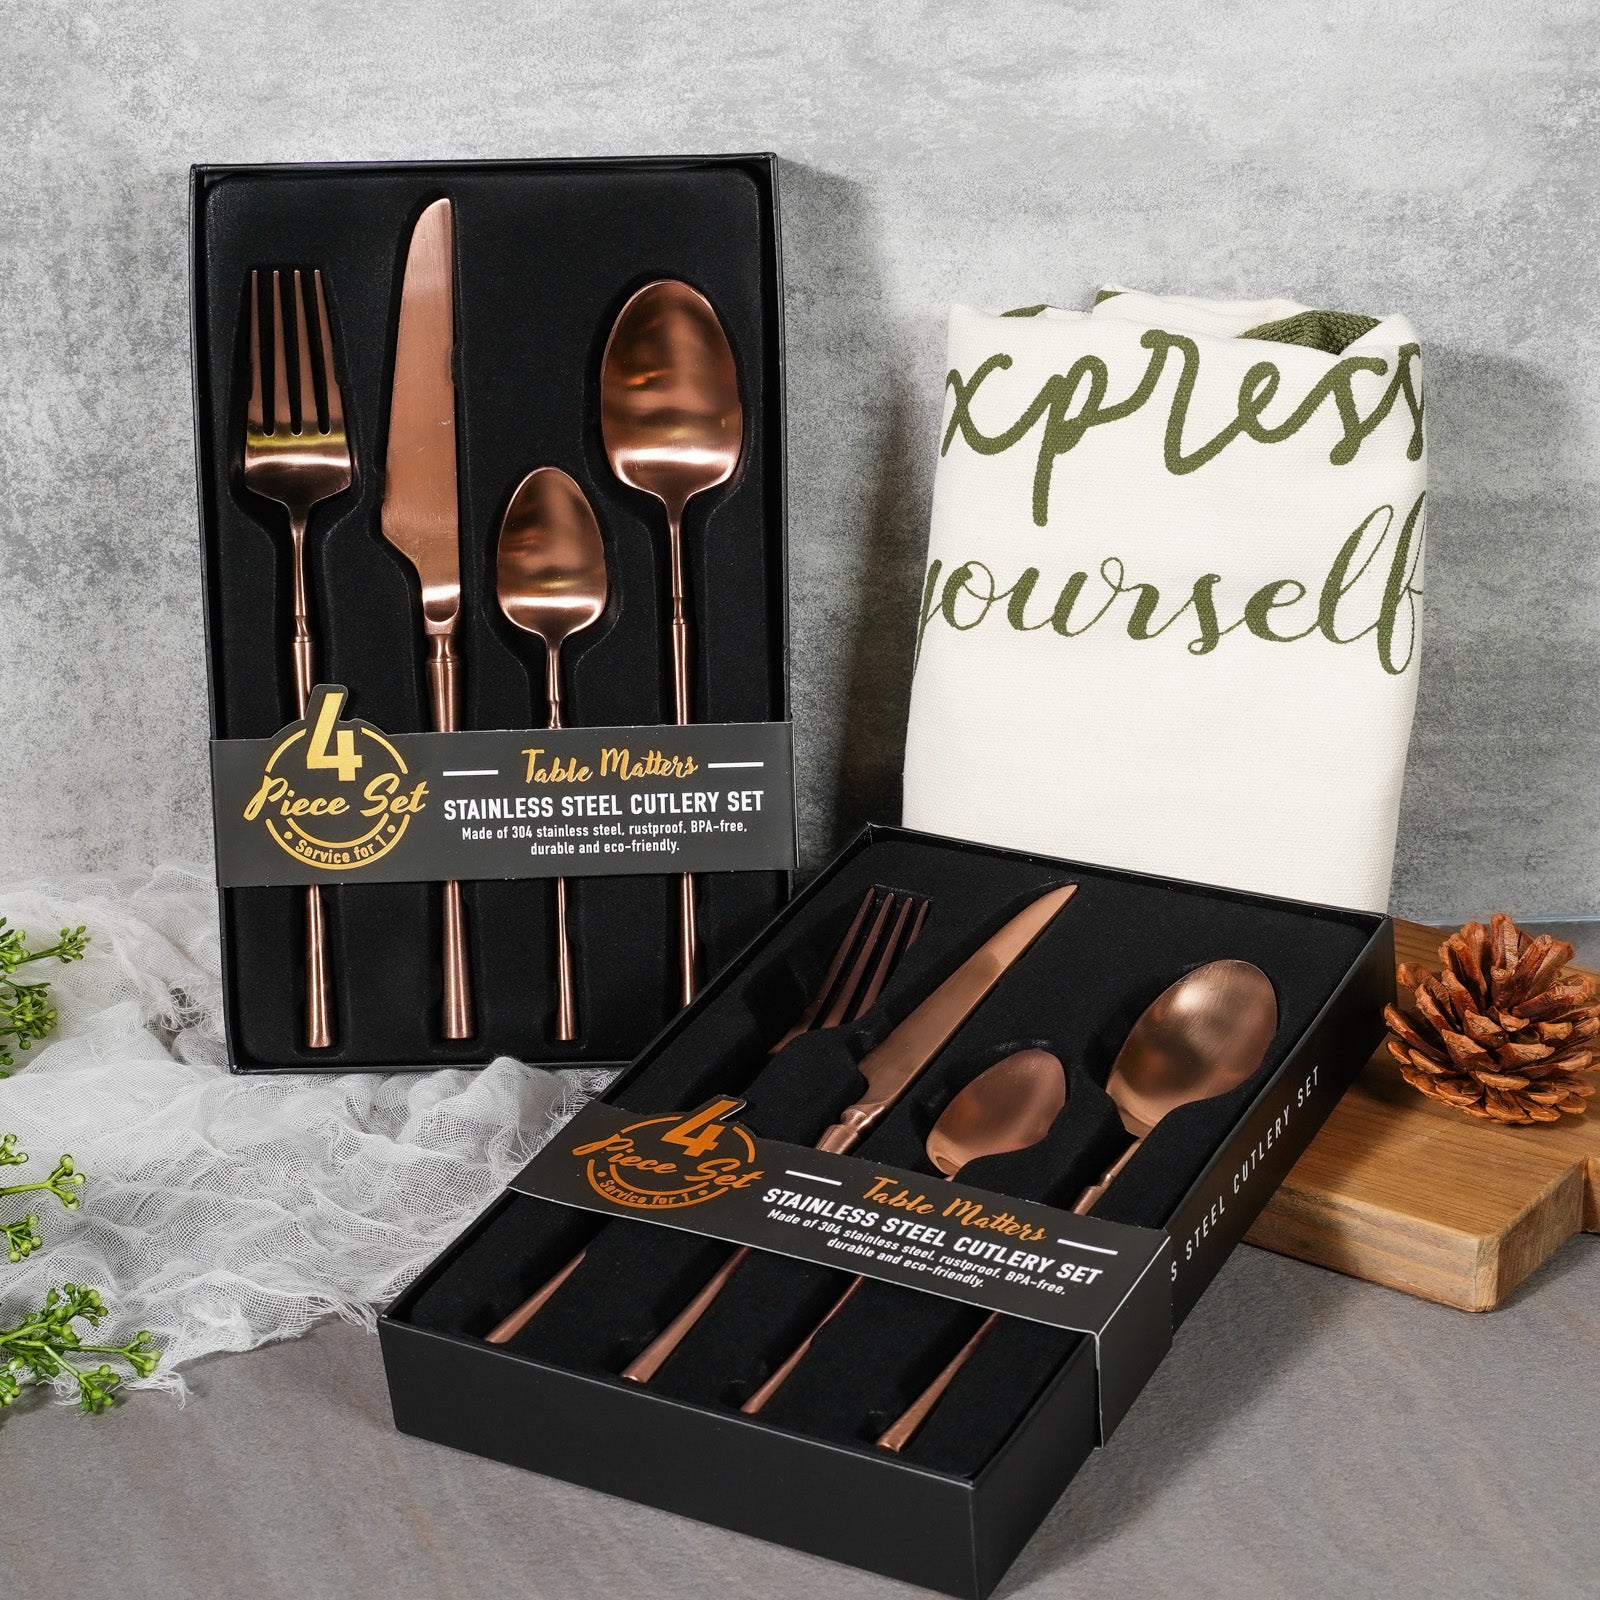 Bundle Deal - Parisian 4PC Stainless Steel Cutlery Set - Rose Gold (Set of 2)